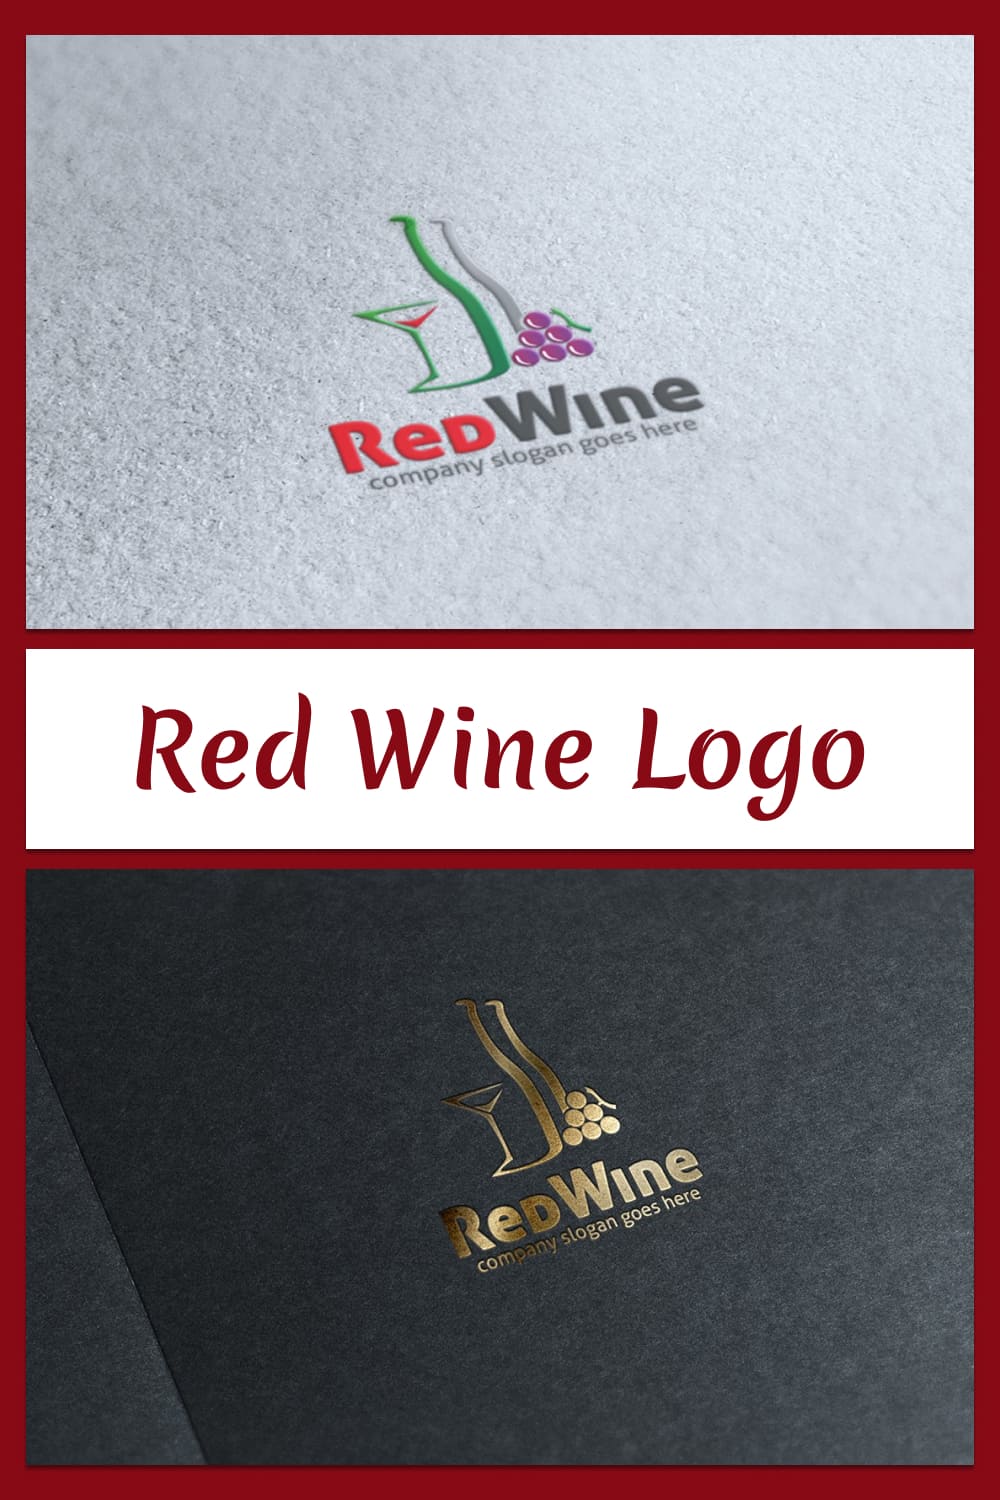 Red Wine Logo - Pinterest Image Preview.